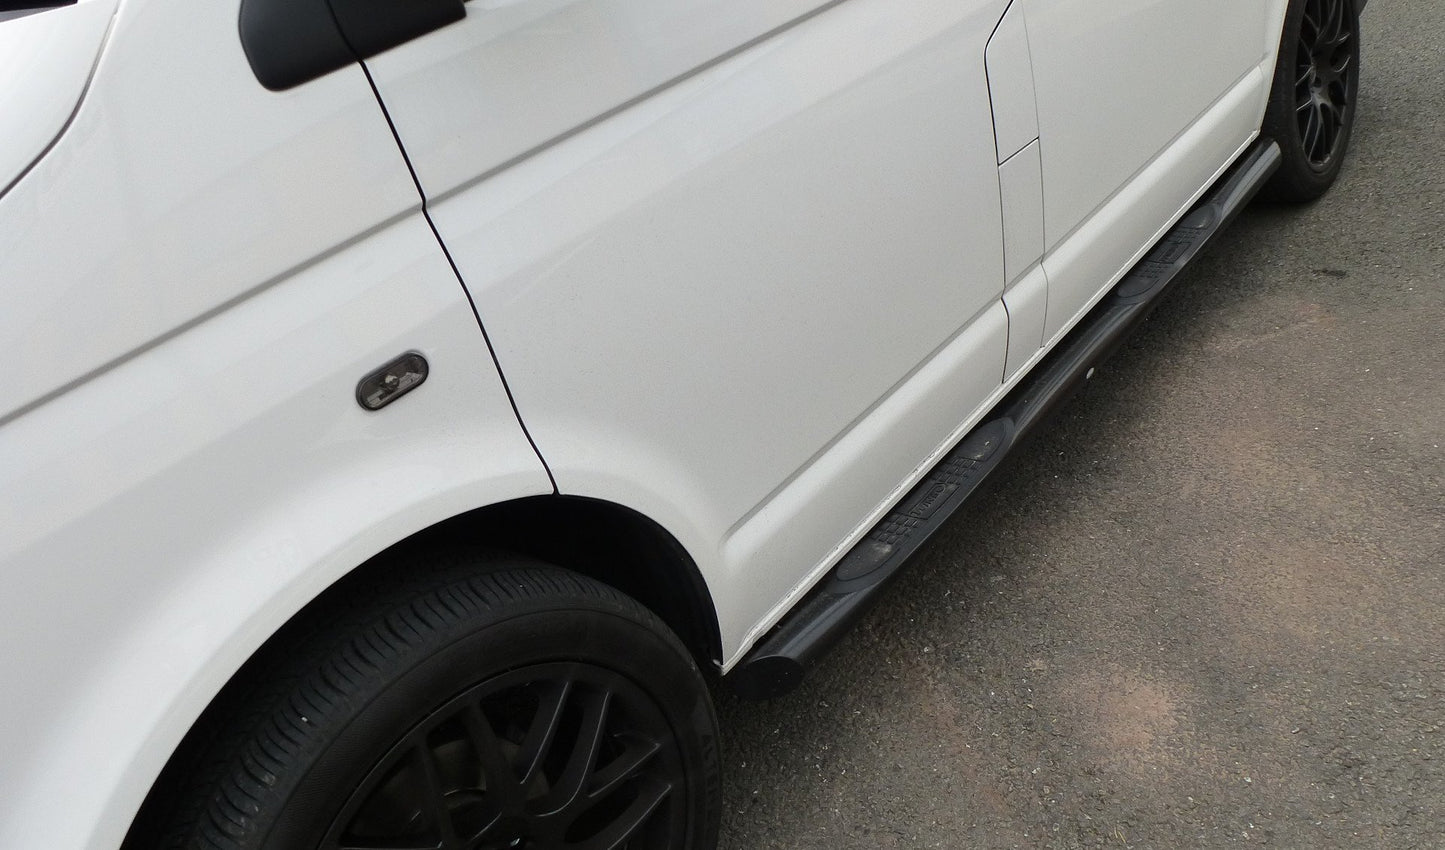 Black Powder Coated SUS201 S/Steel Side Bars with Pads for Volkswagen T5 SWB -  - sold by Direct4x4